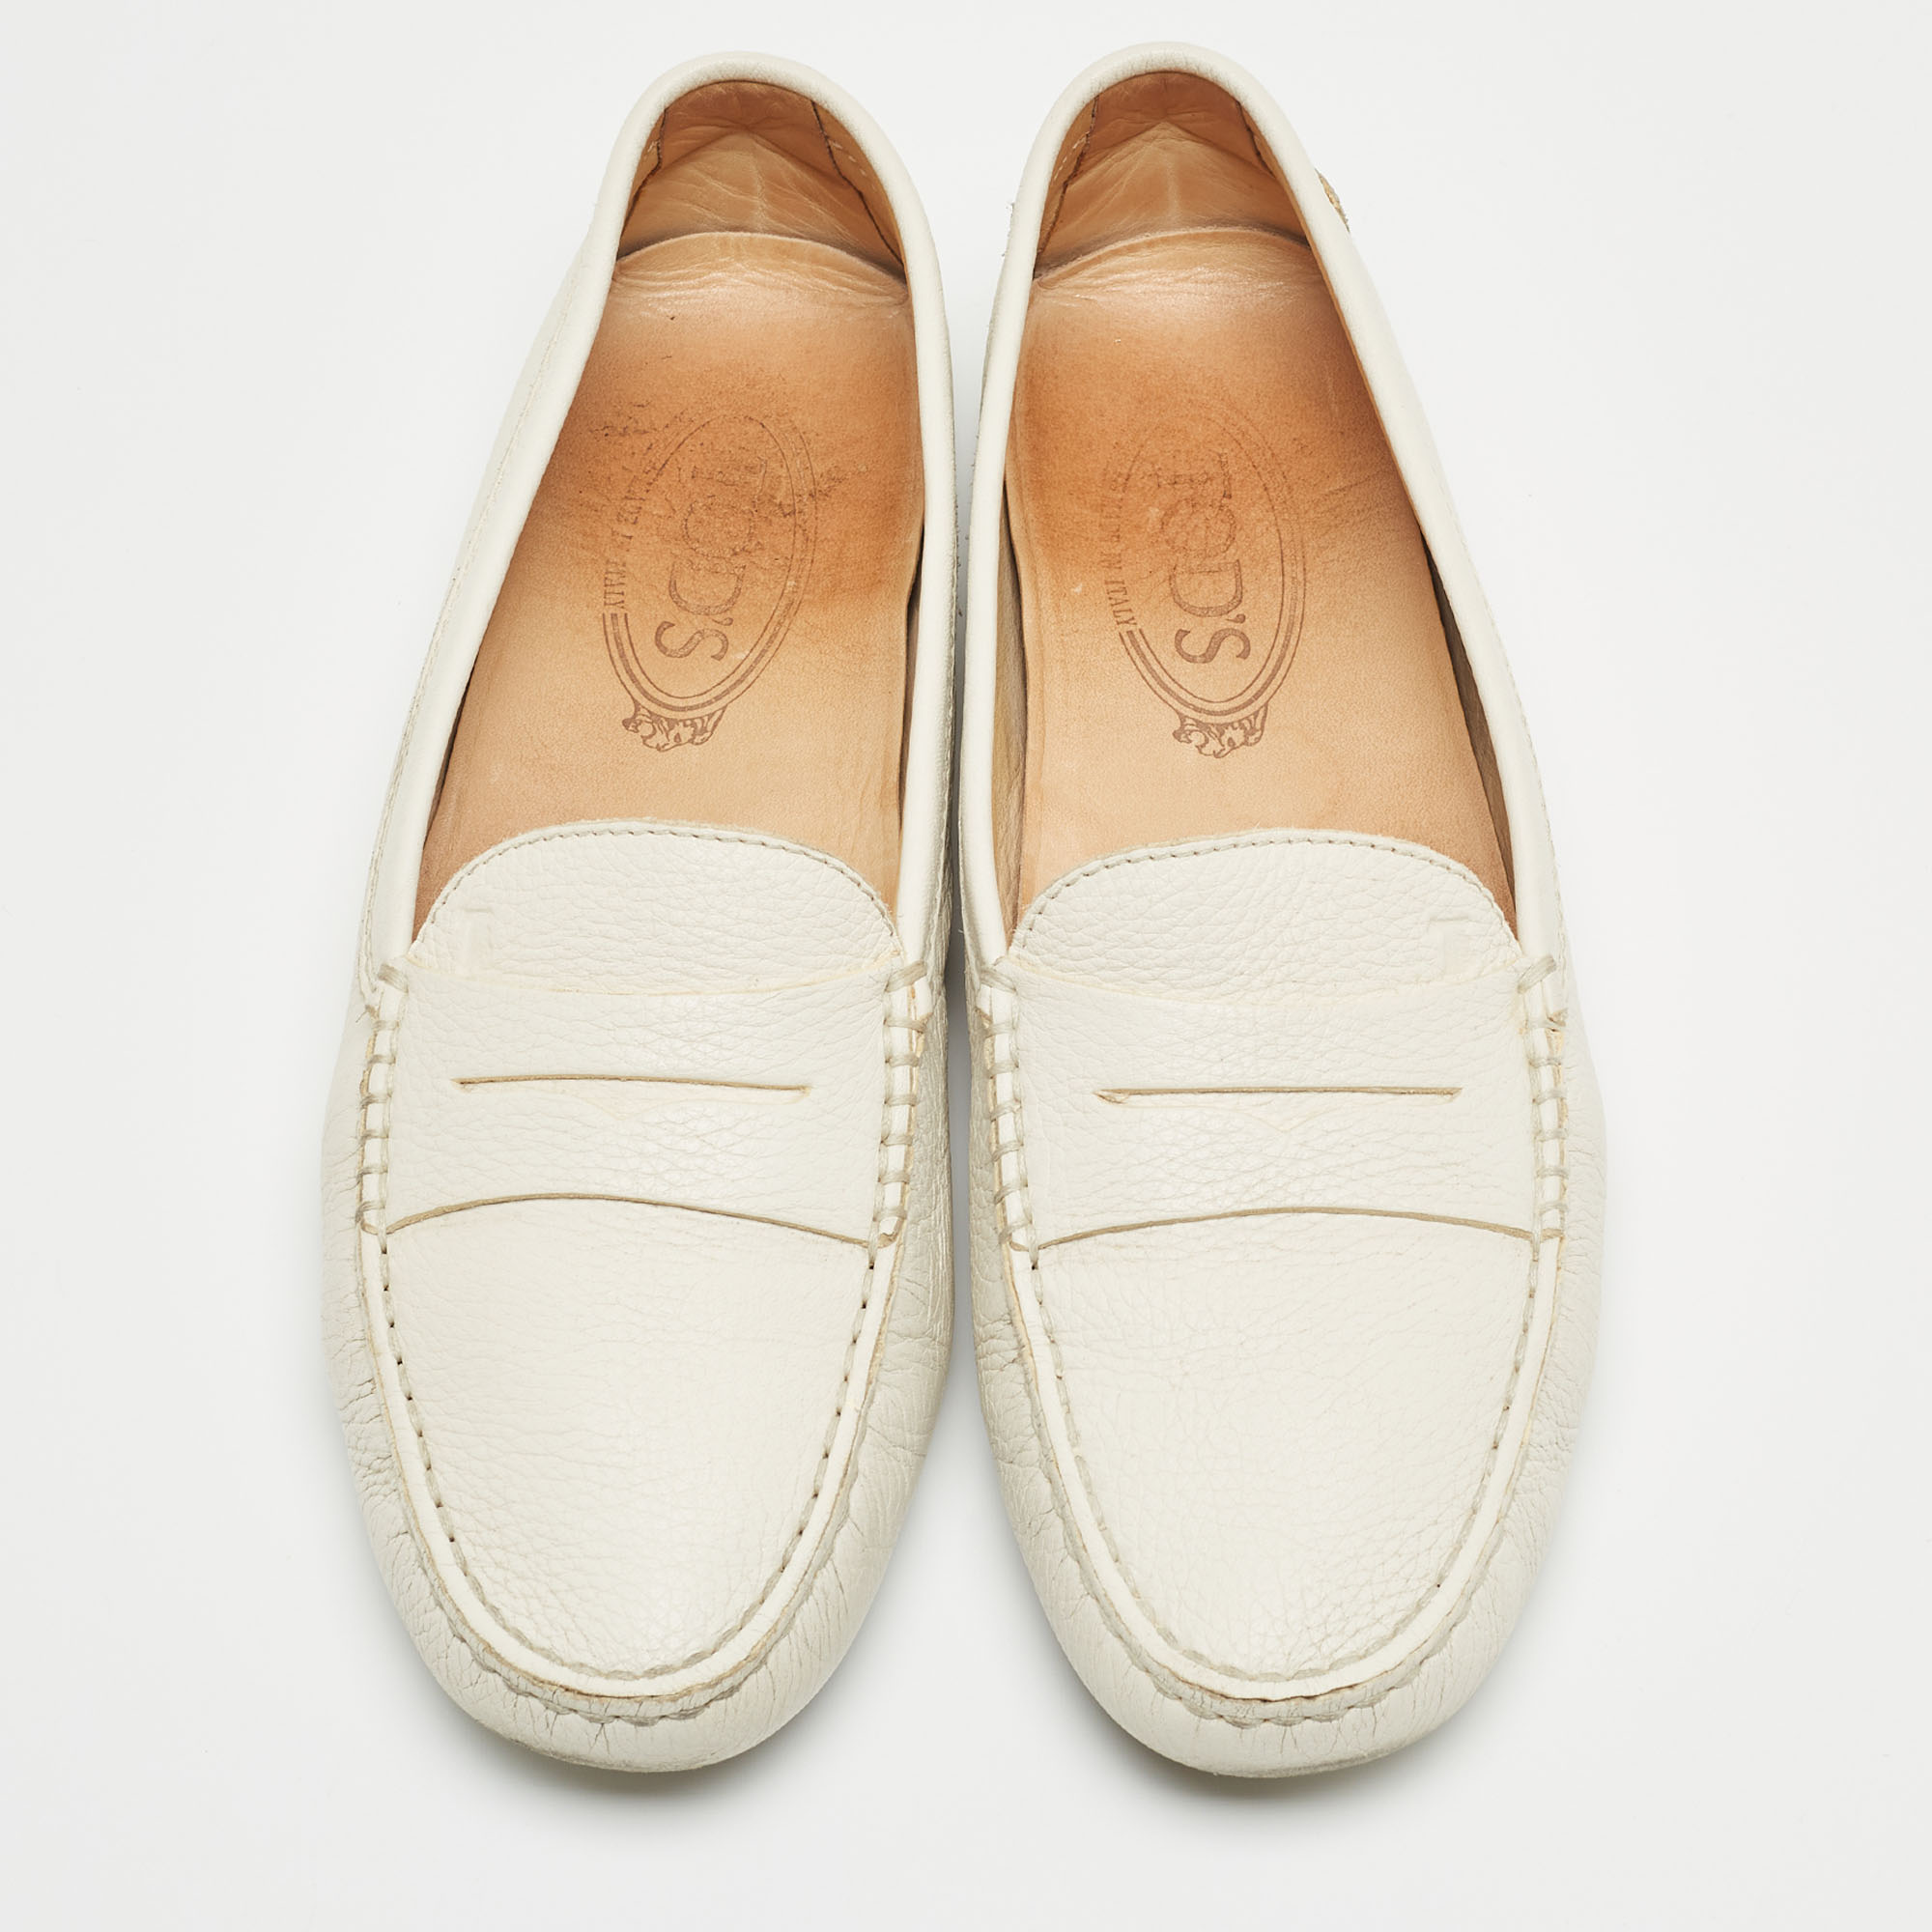 Tod's Cream Leather Gommino Slip On Loafers Size 39